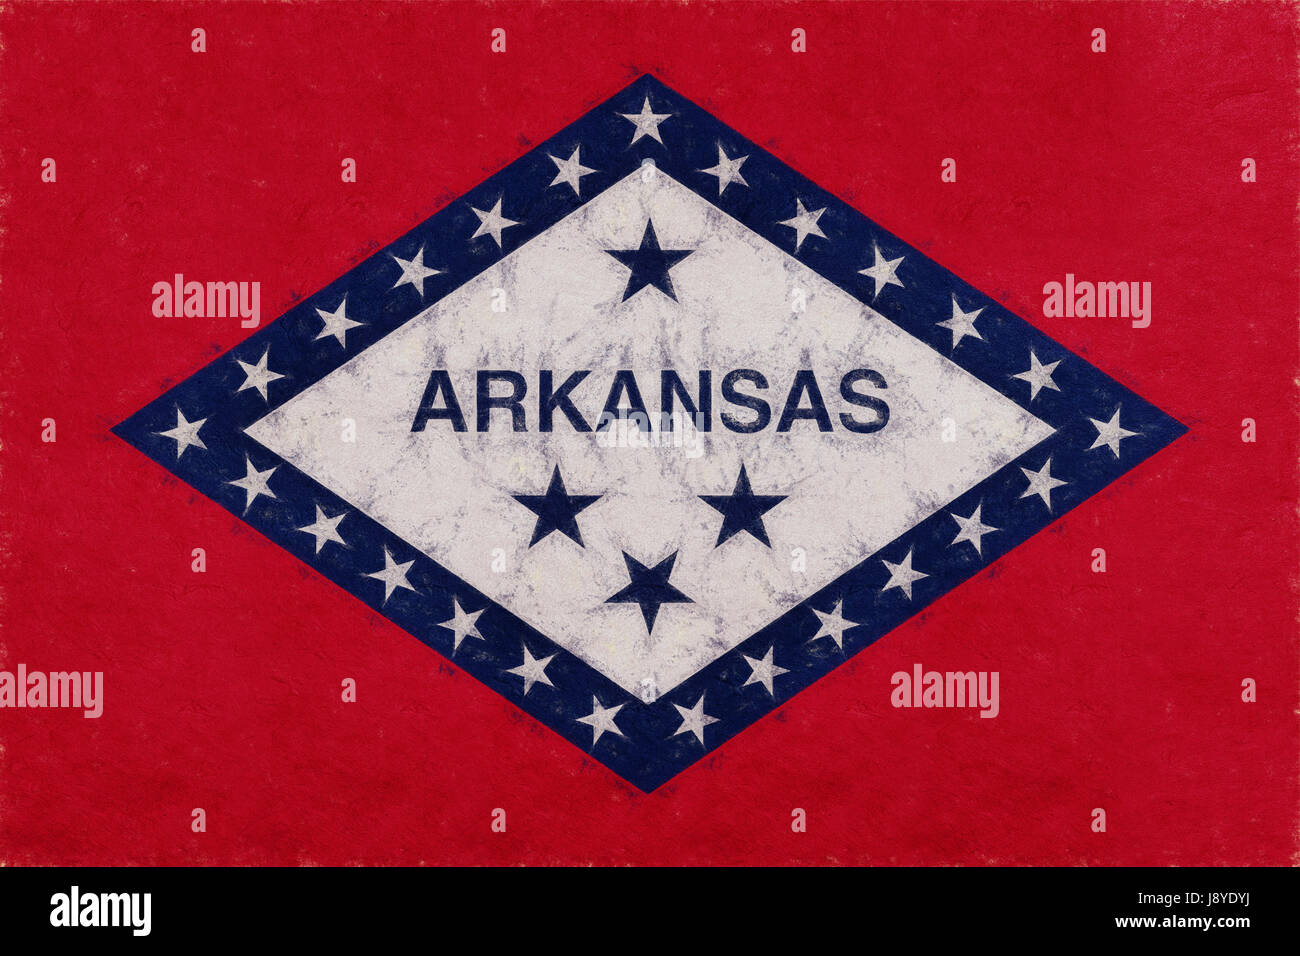 Illustration of the flag of Arkansas state in America with a grunge look Stock Photo